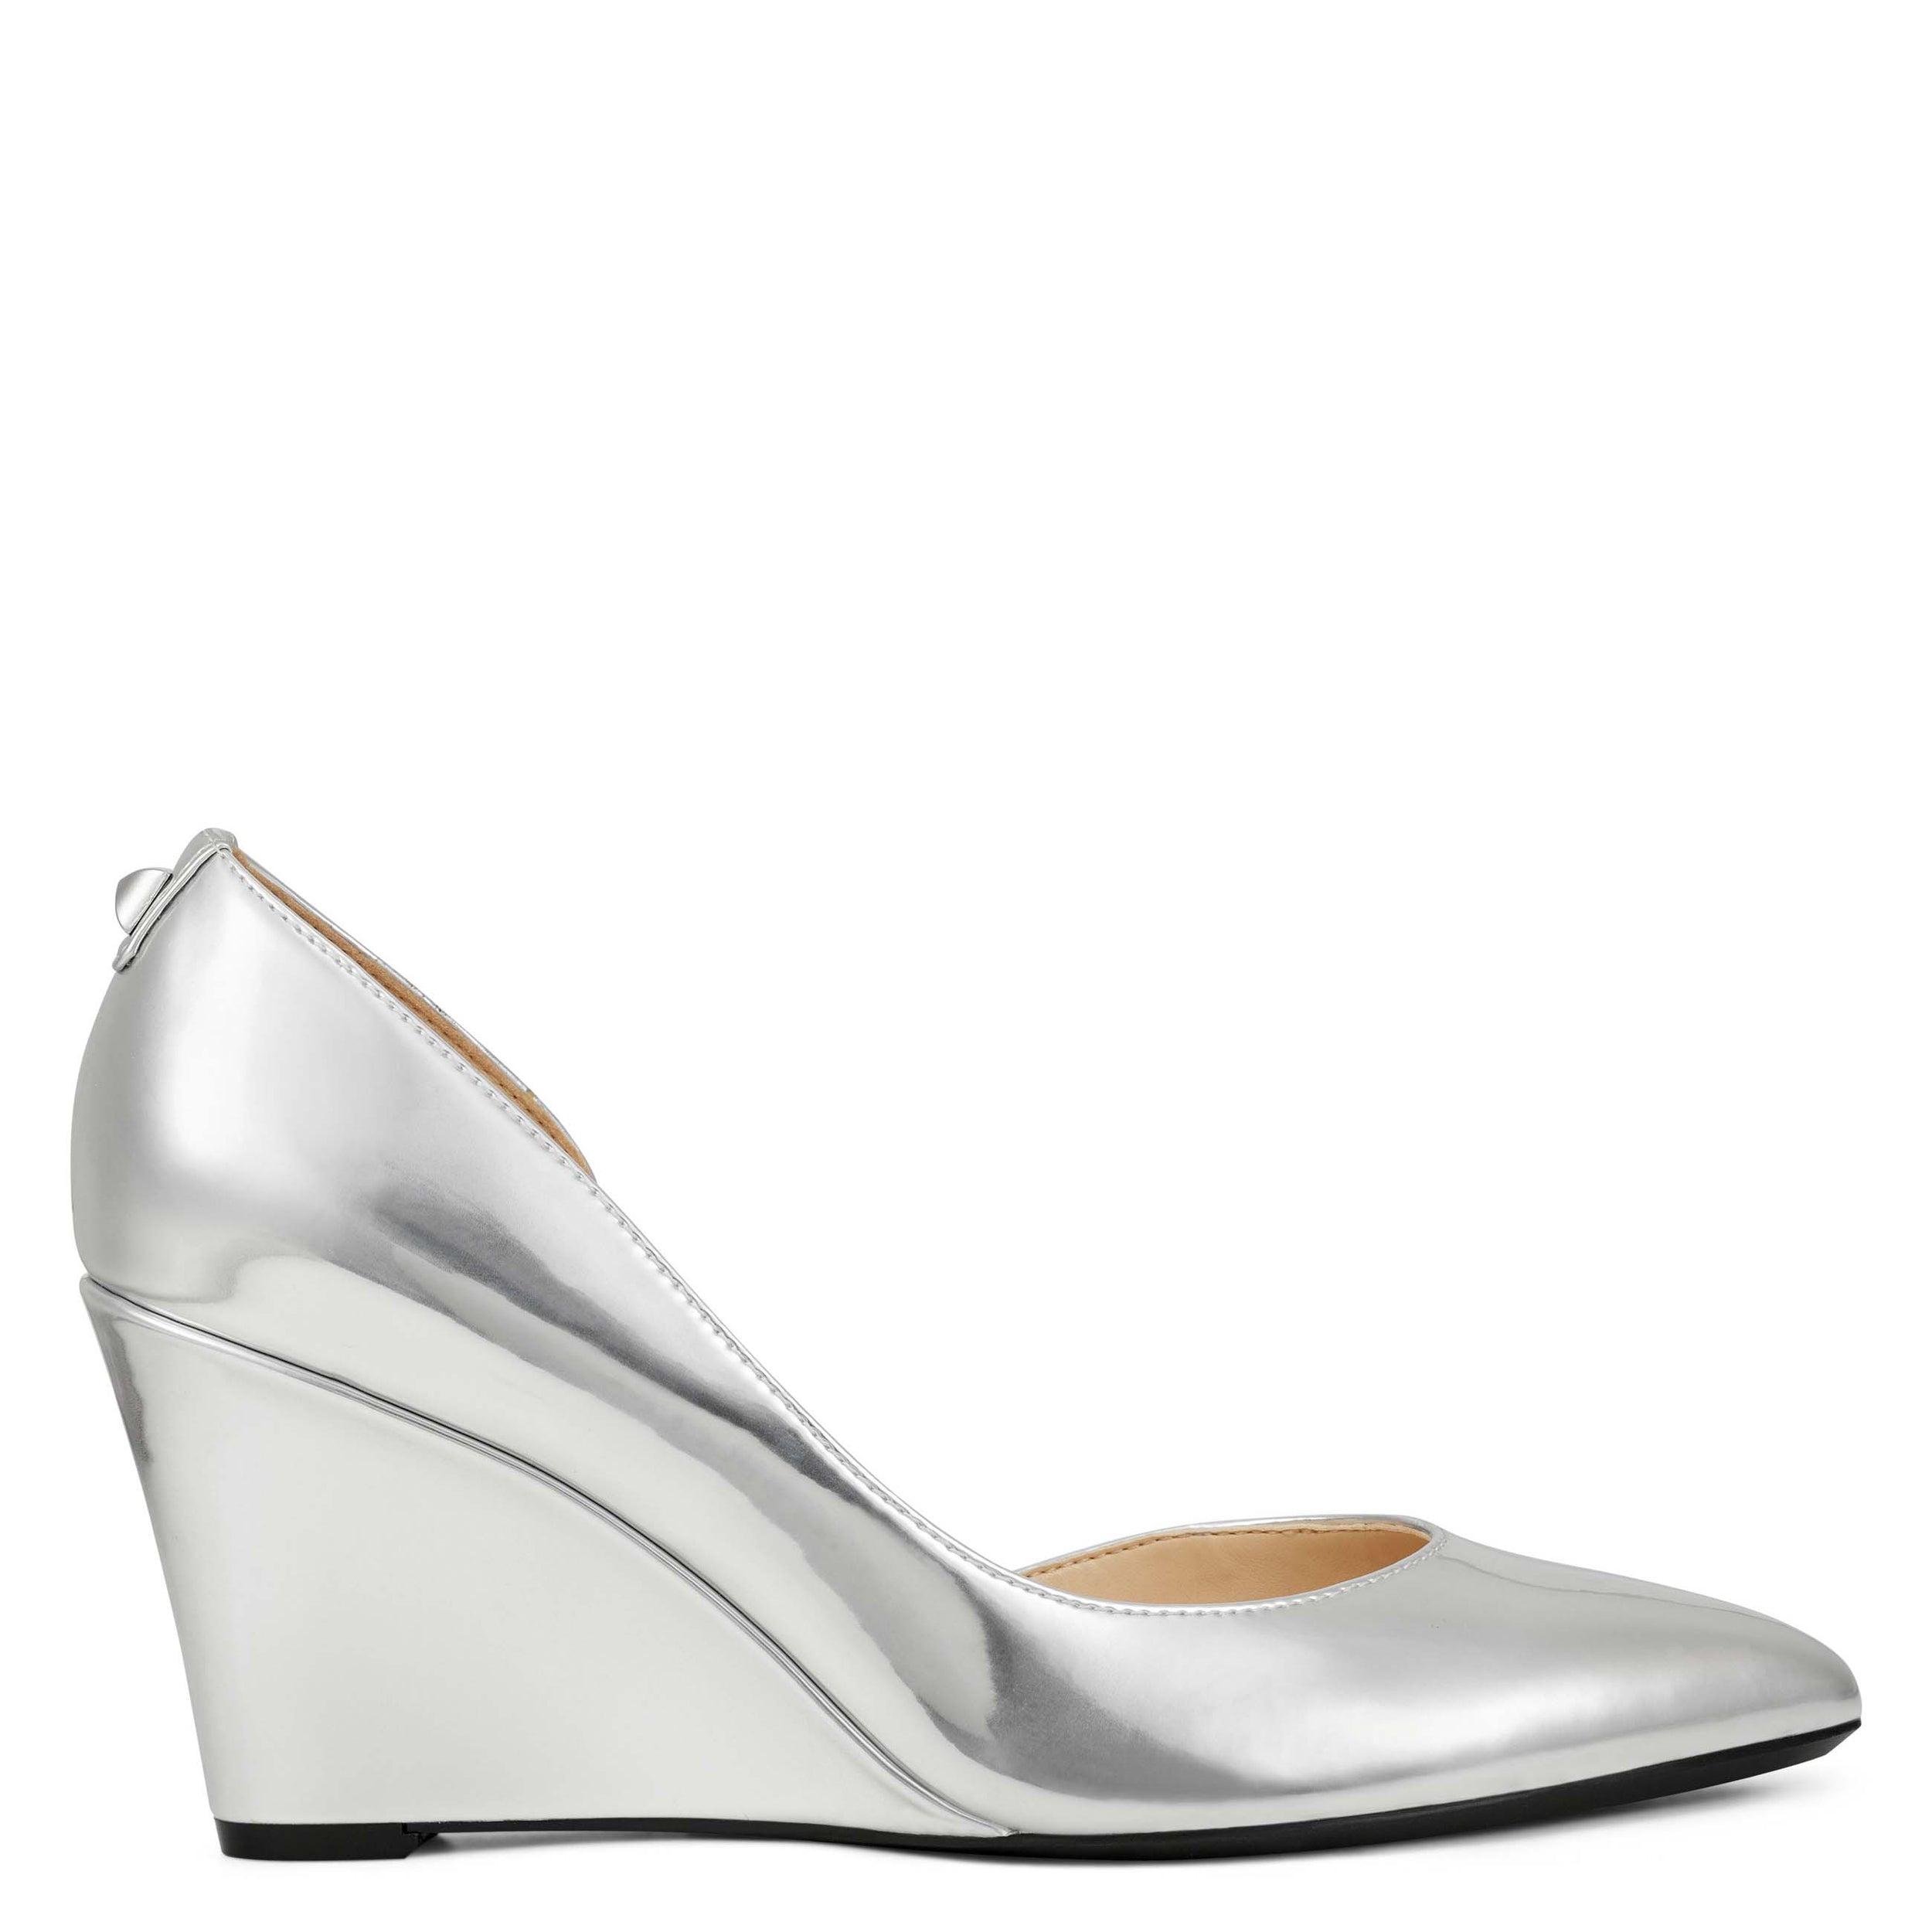 Heels | Nine West comfortable and fashionable shoes and handbags for